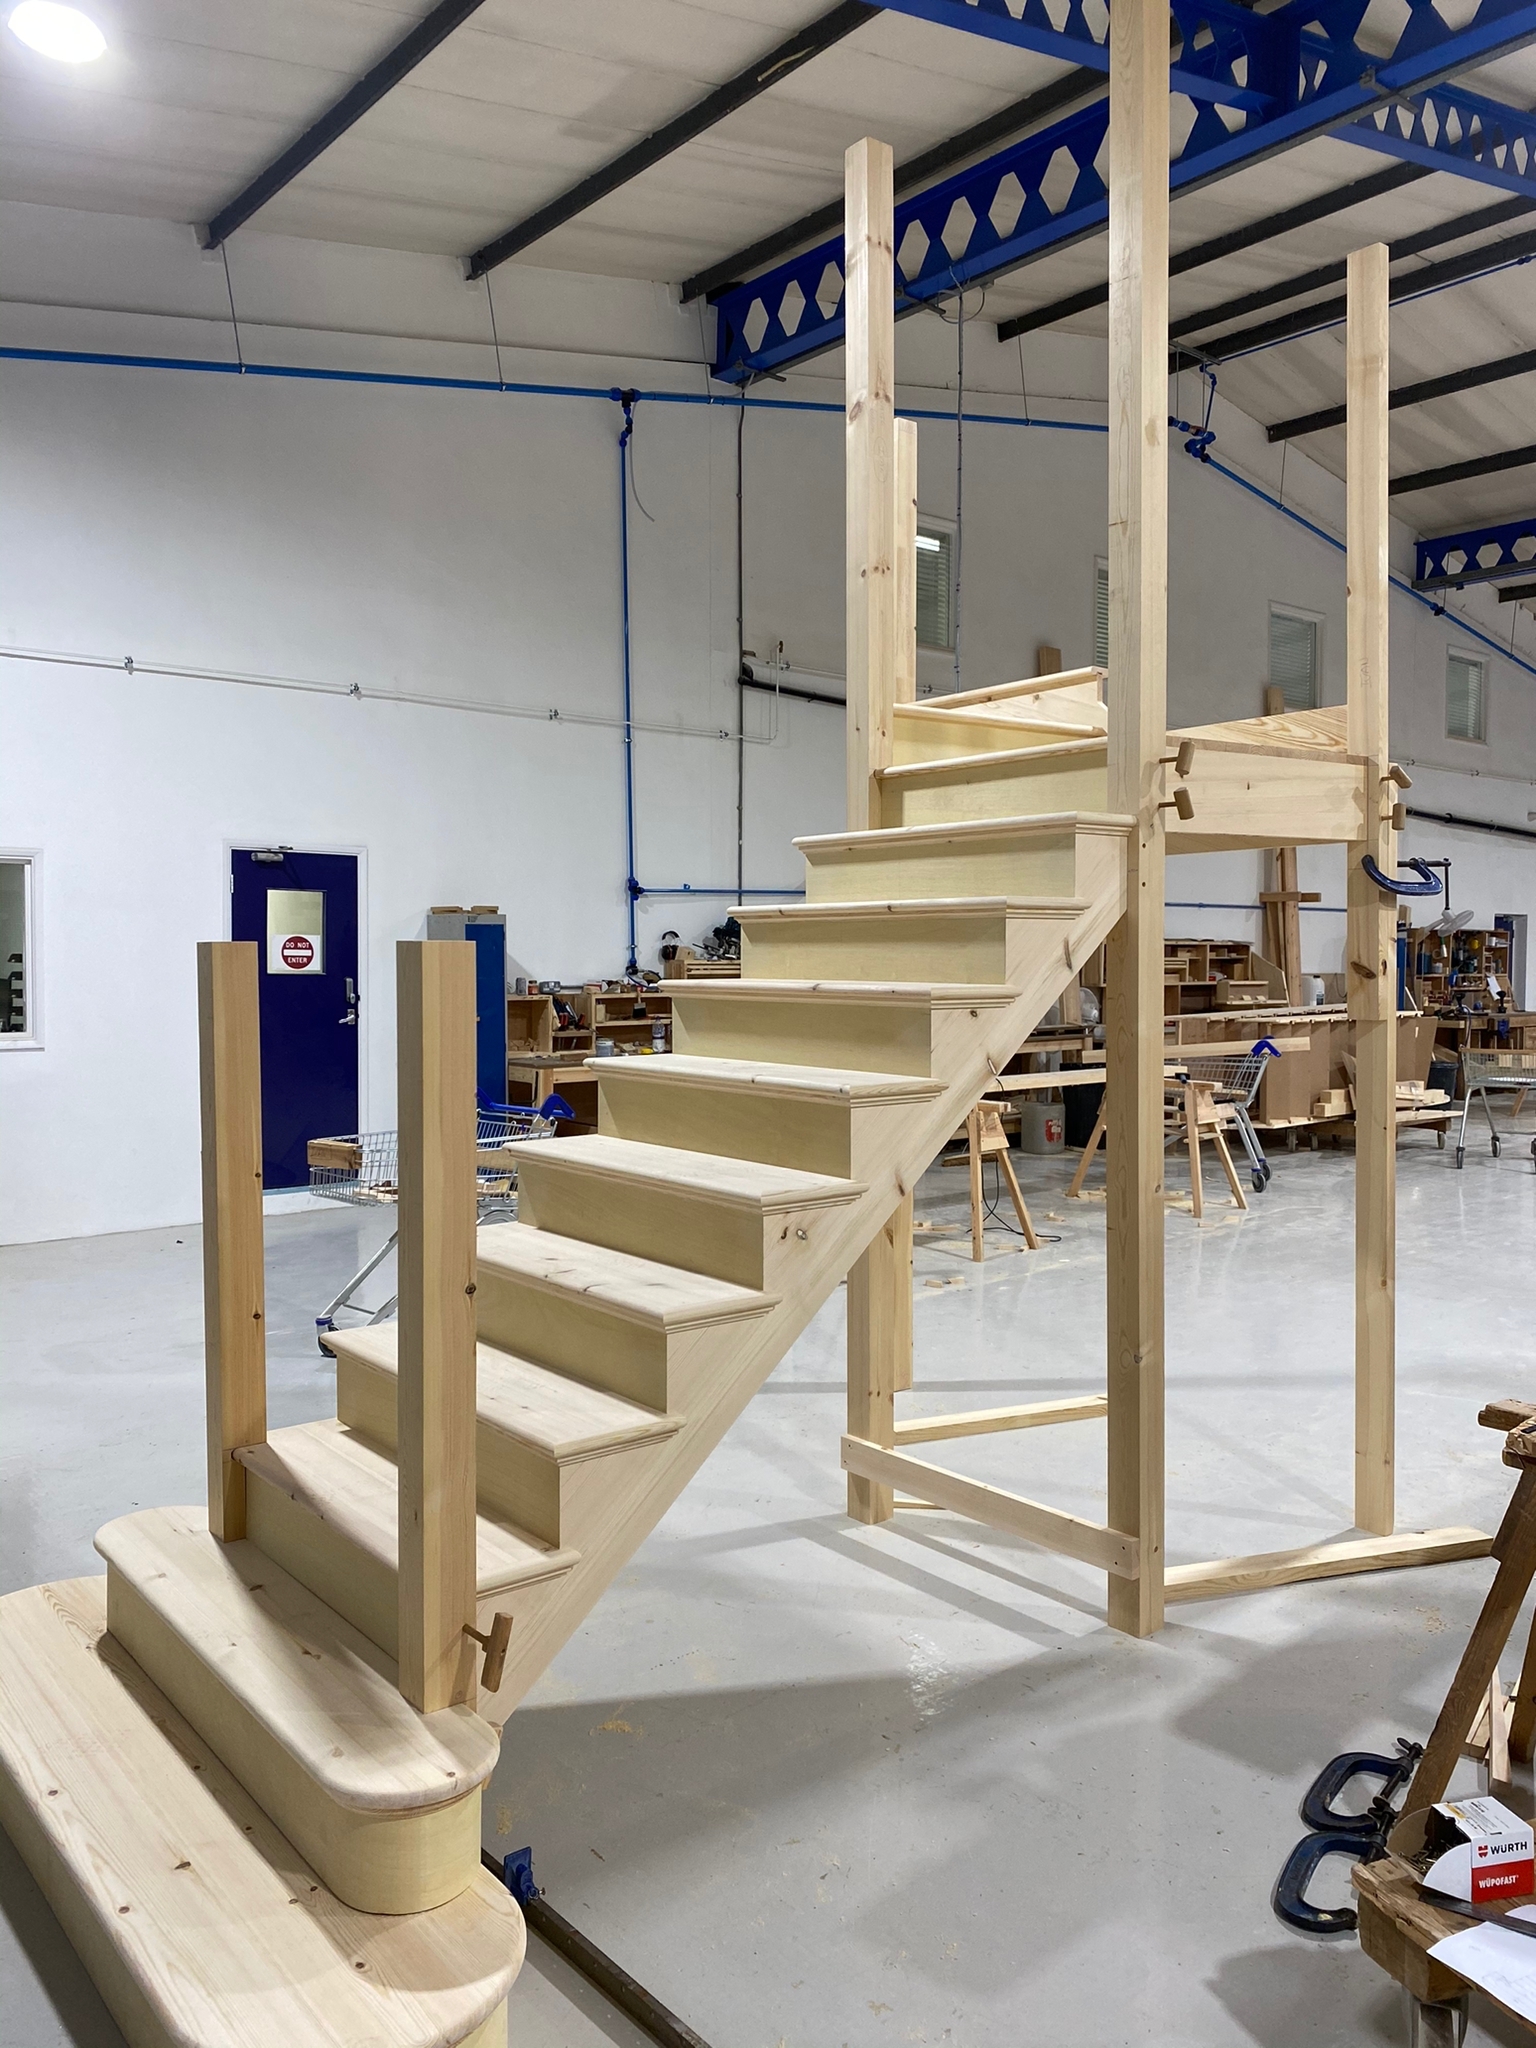 Looking for a high-quality staircase at an affordable price?